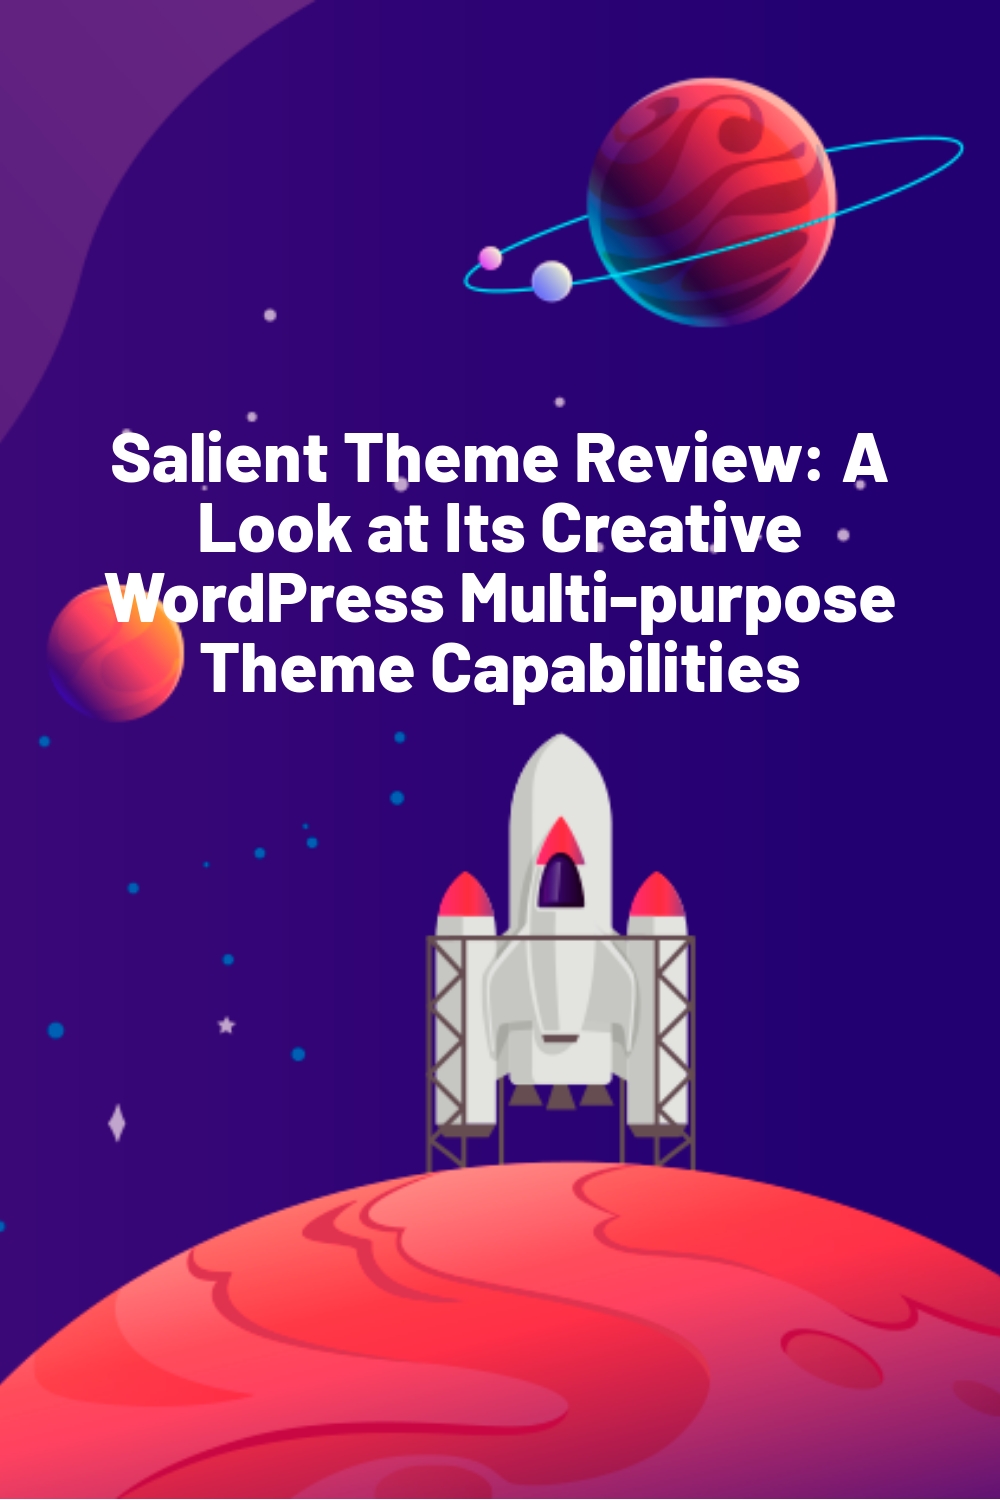 Salient Theme Review: A Look at Its Creative WordPress Multi-purpose Theme Capabilities